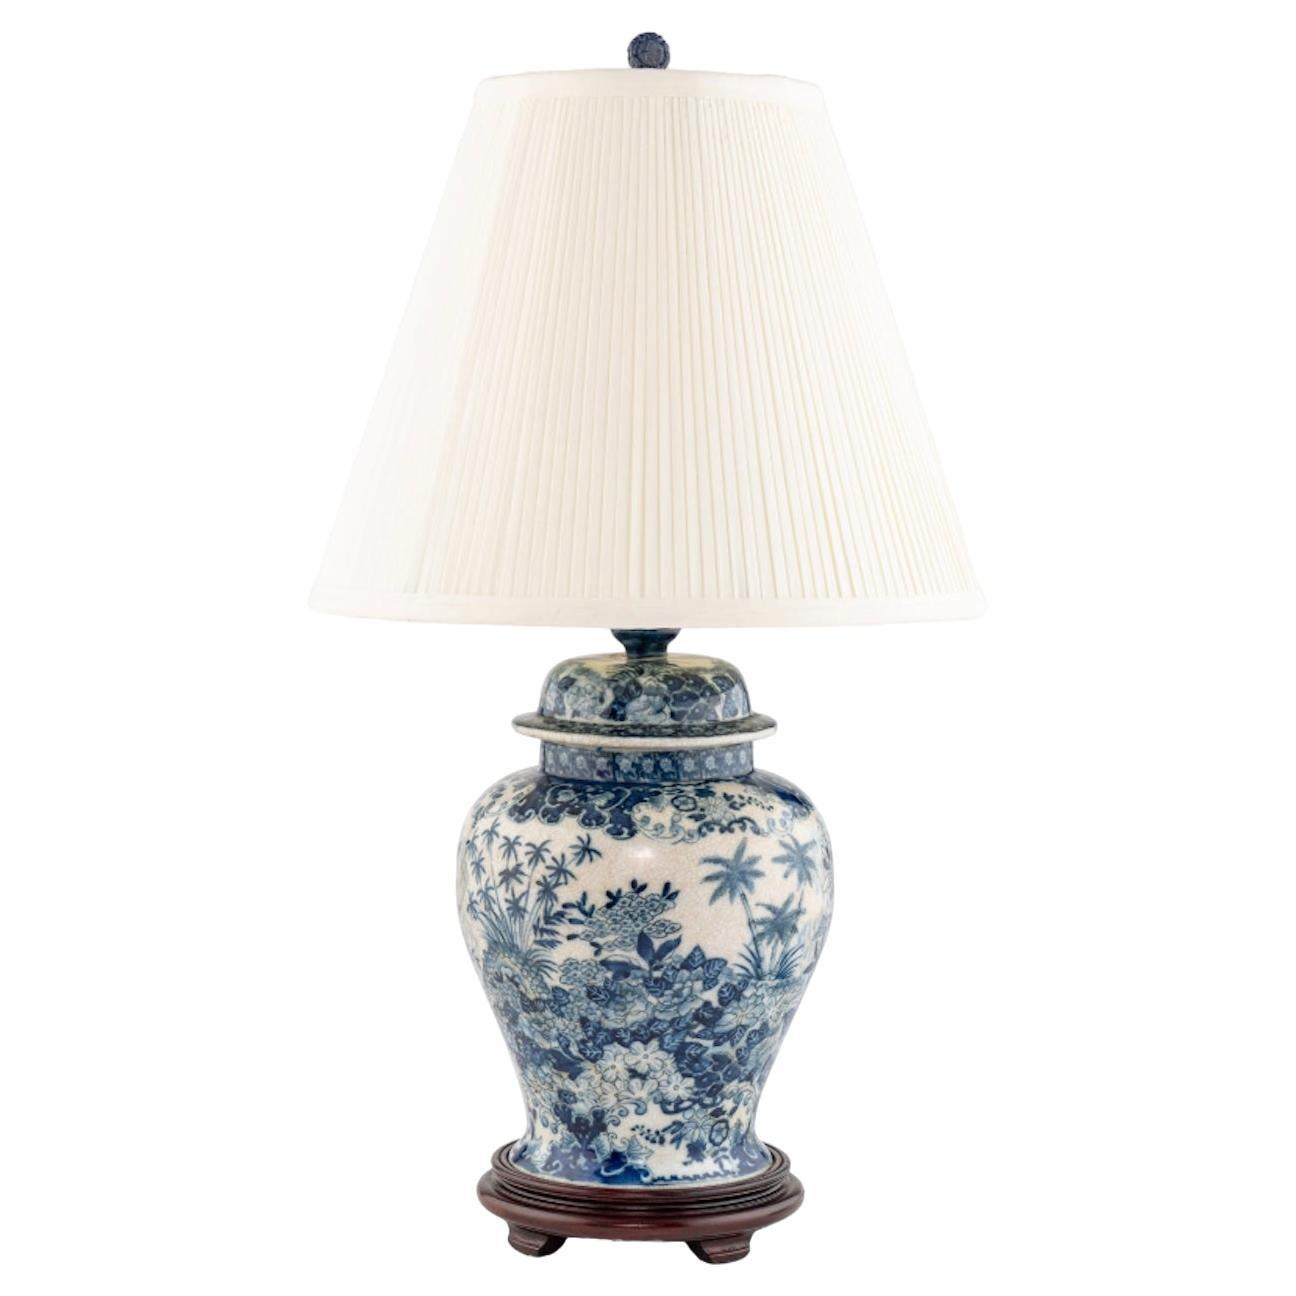 A Blue and White Porcelain Lamp 20th Century Height 25 1/2 inches. For Sale